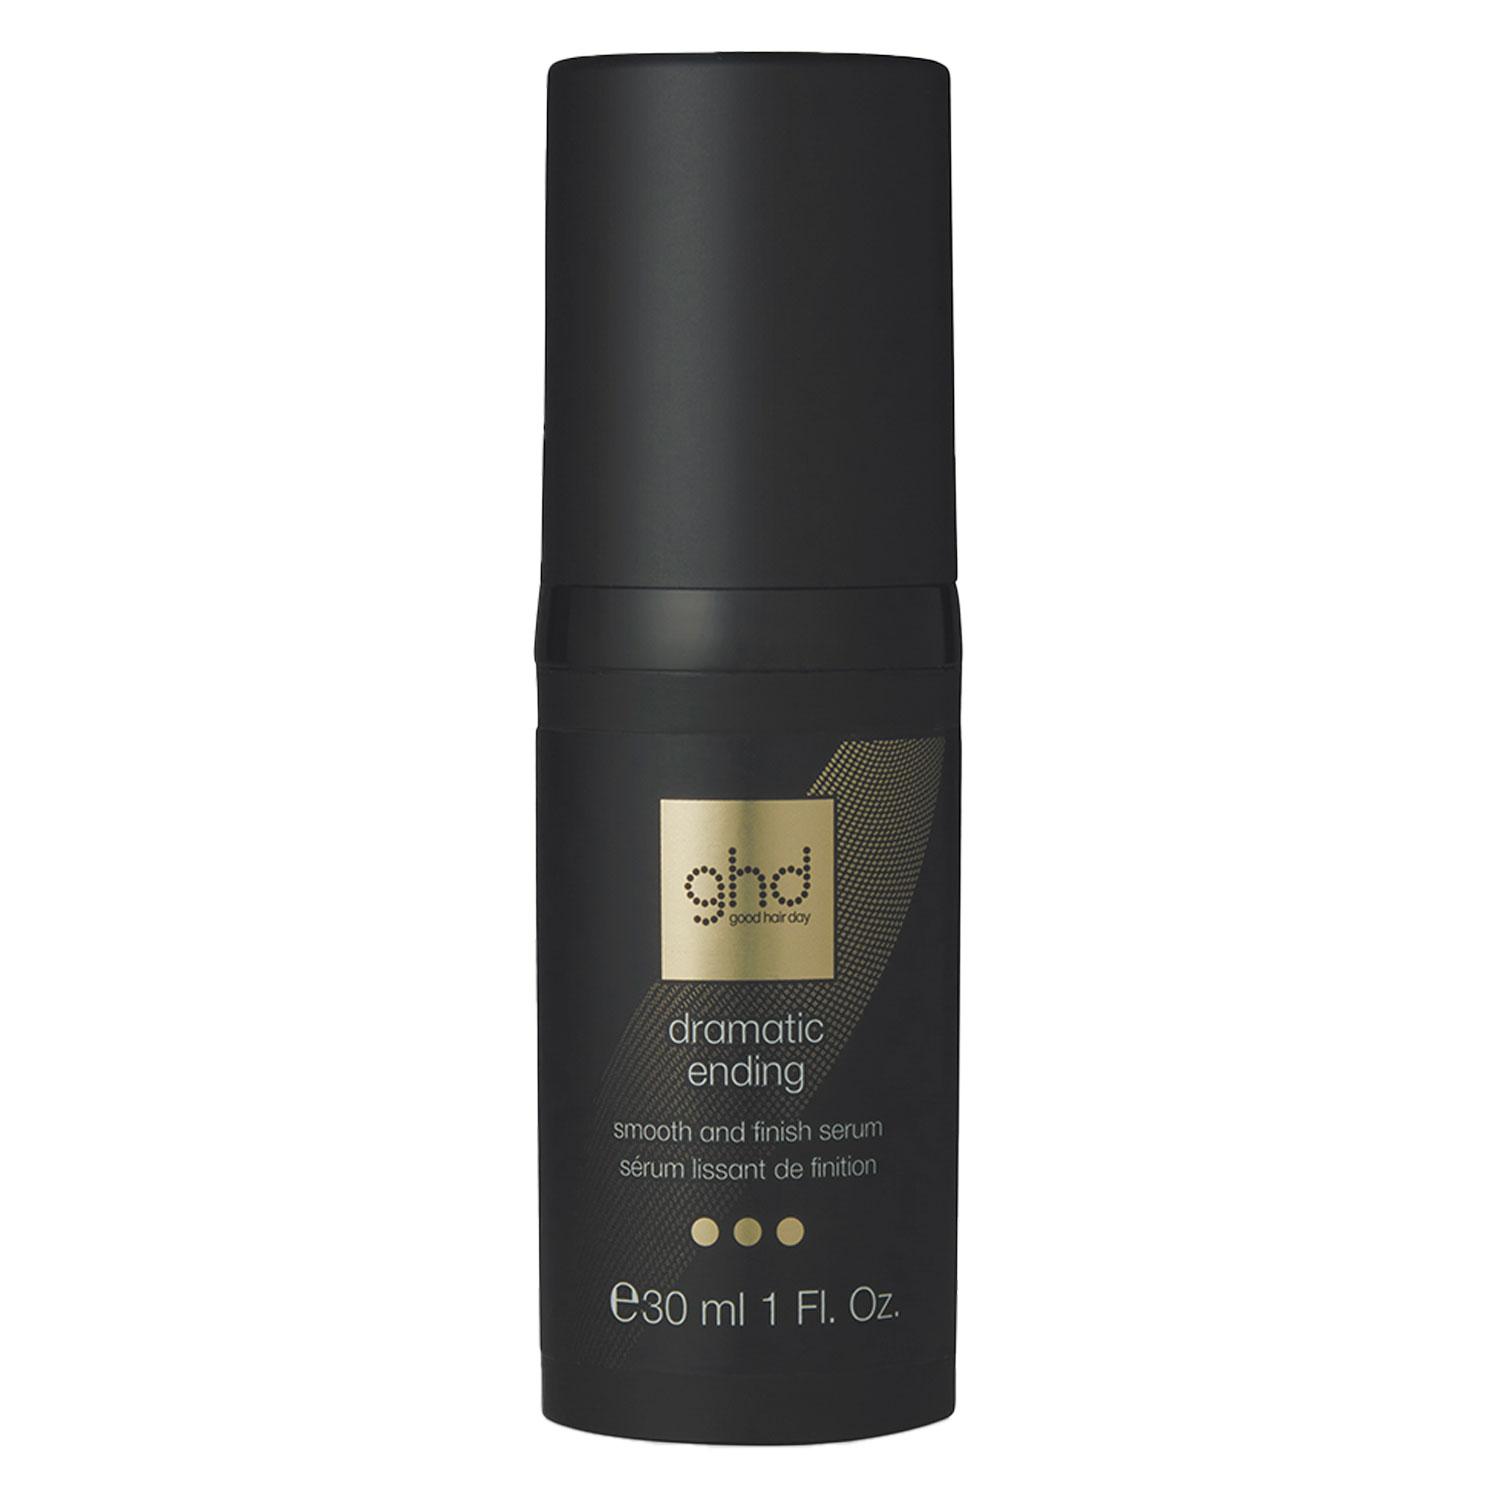 ghd Heat Protection Styling System - Dramatic Ending Smooth & Finish Serum